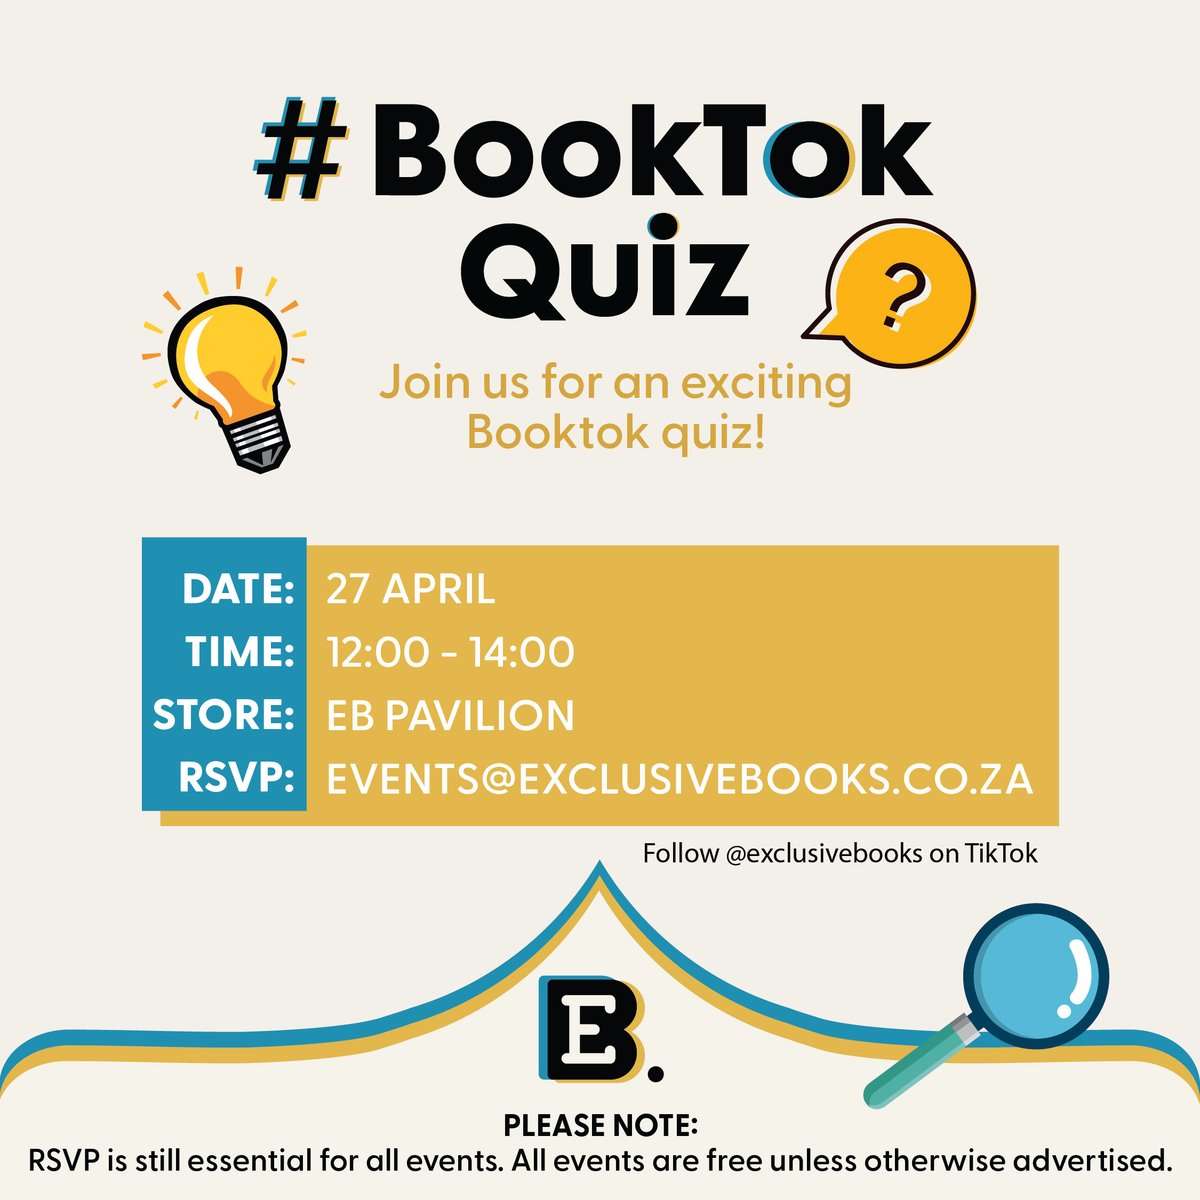 Join us at Exclusive Books for an exciting BookTok Quiz! RSVP to events@exclusivebooks.co.za @ExclusiveBooks